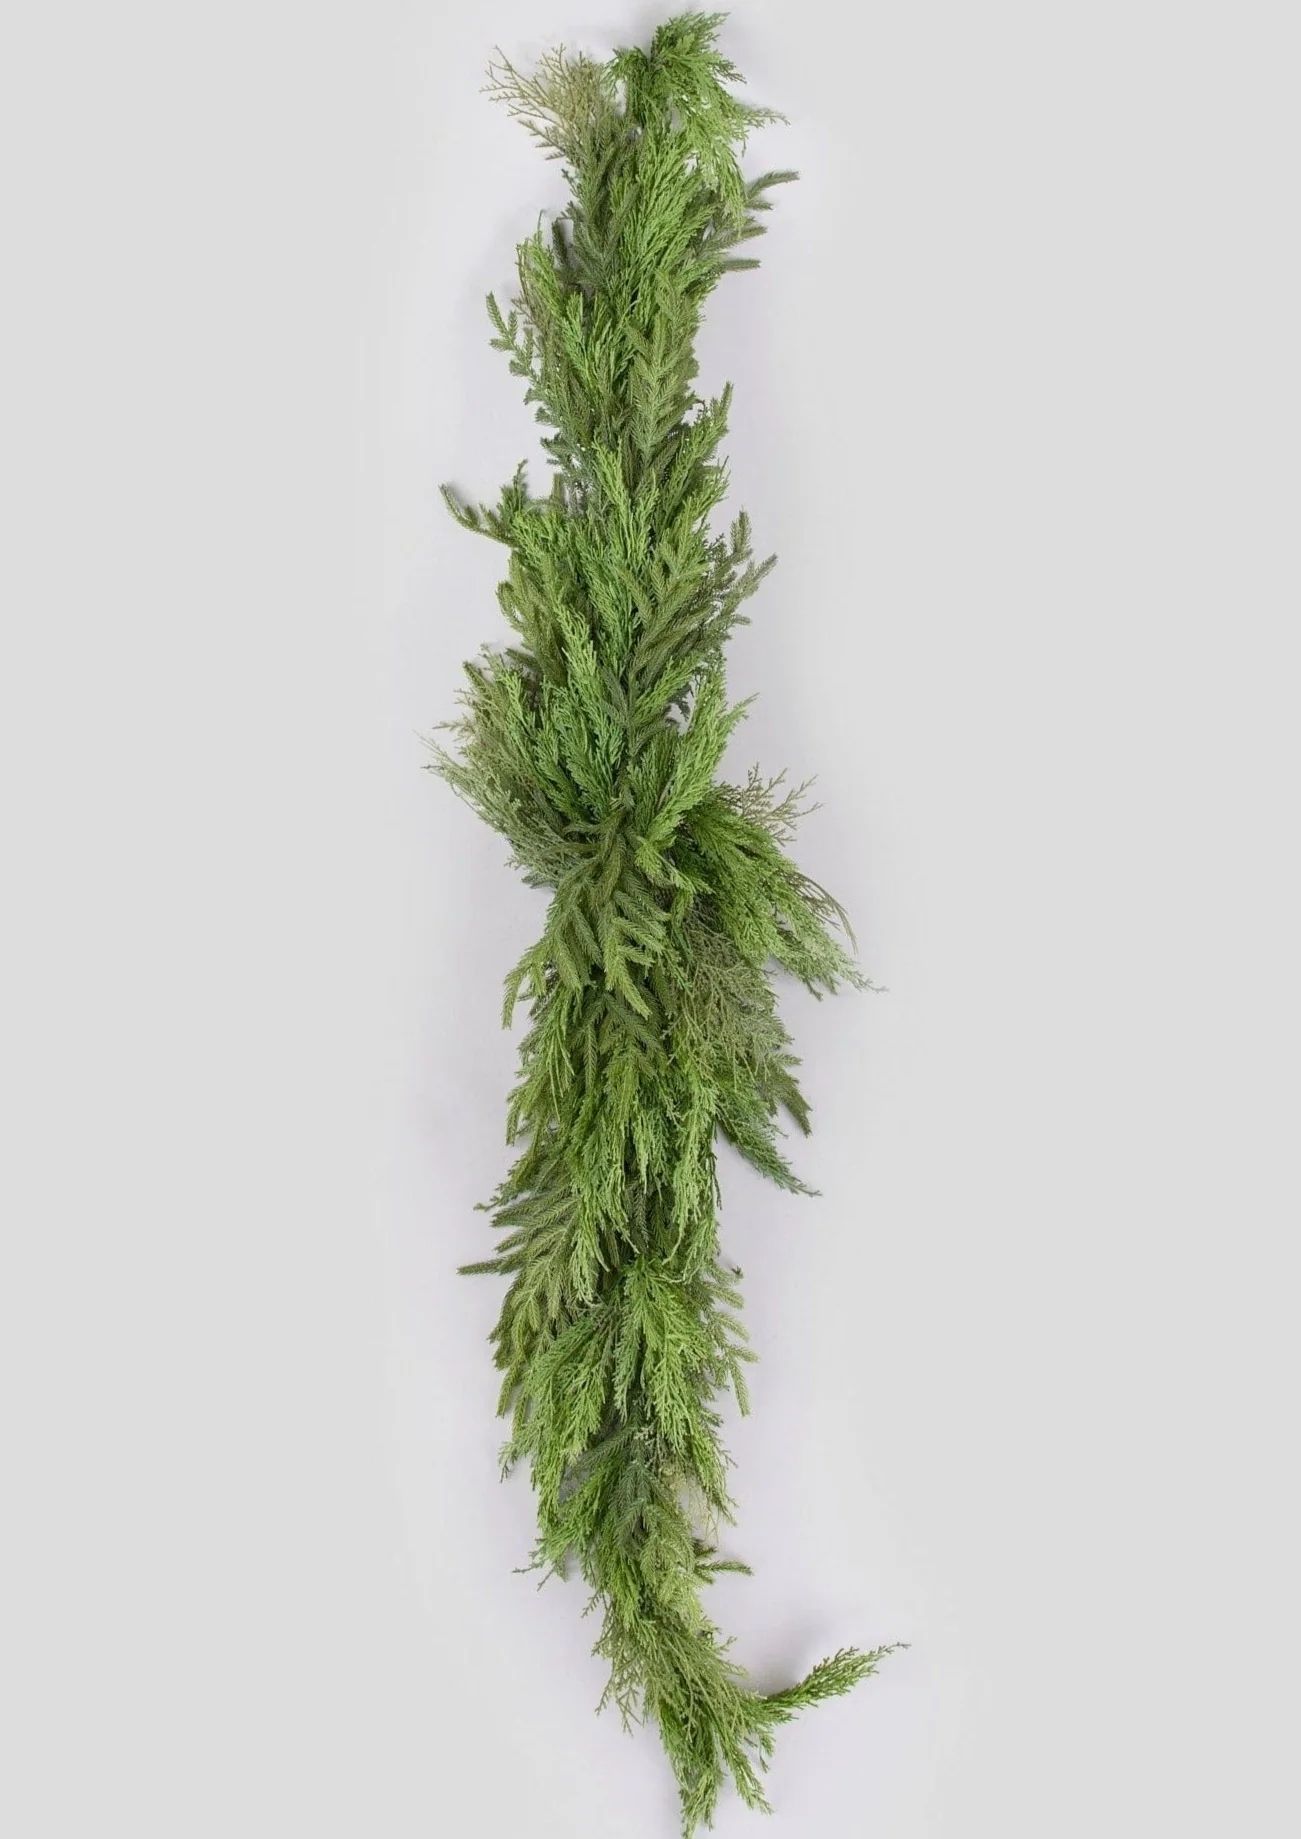 Cypress & Pine Garland | Faux Christmas Green Garlands at Afloral.com | Afloral